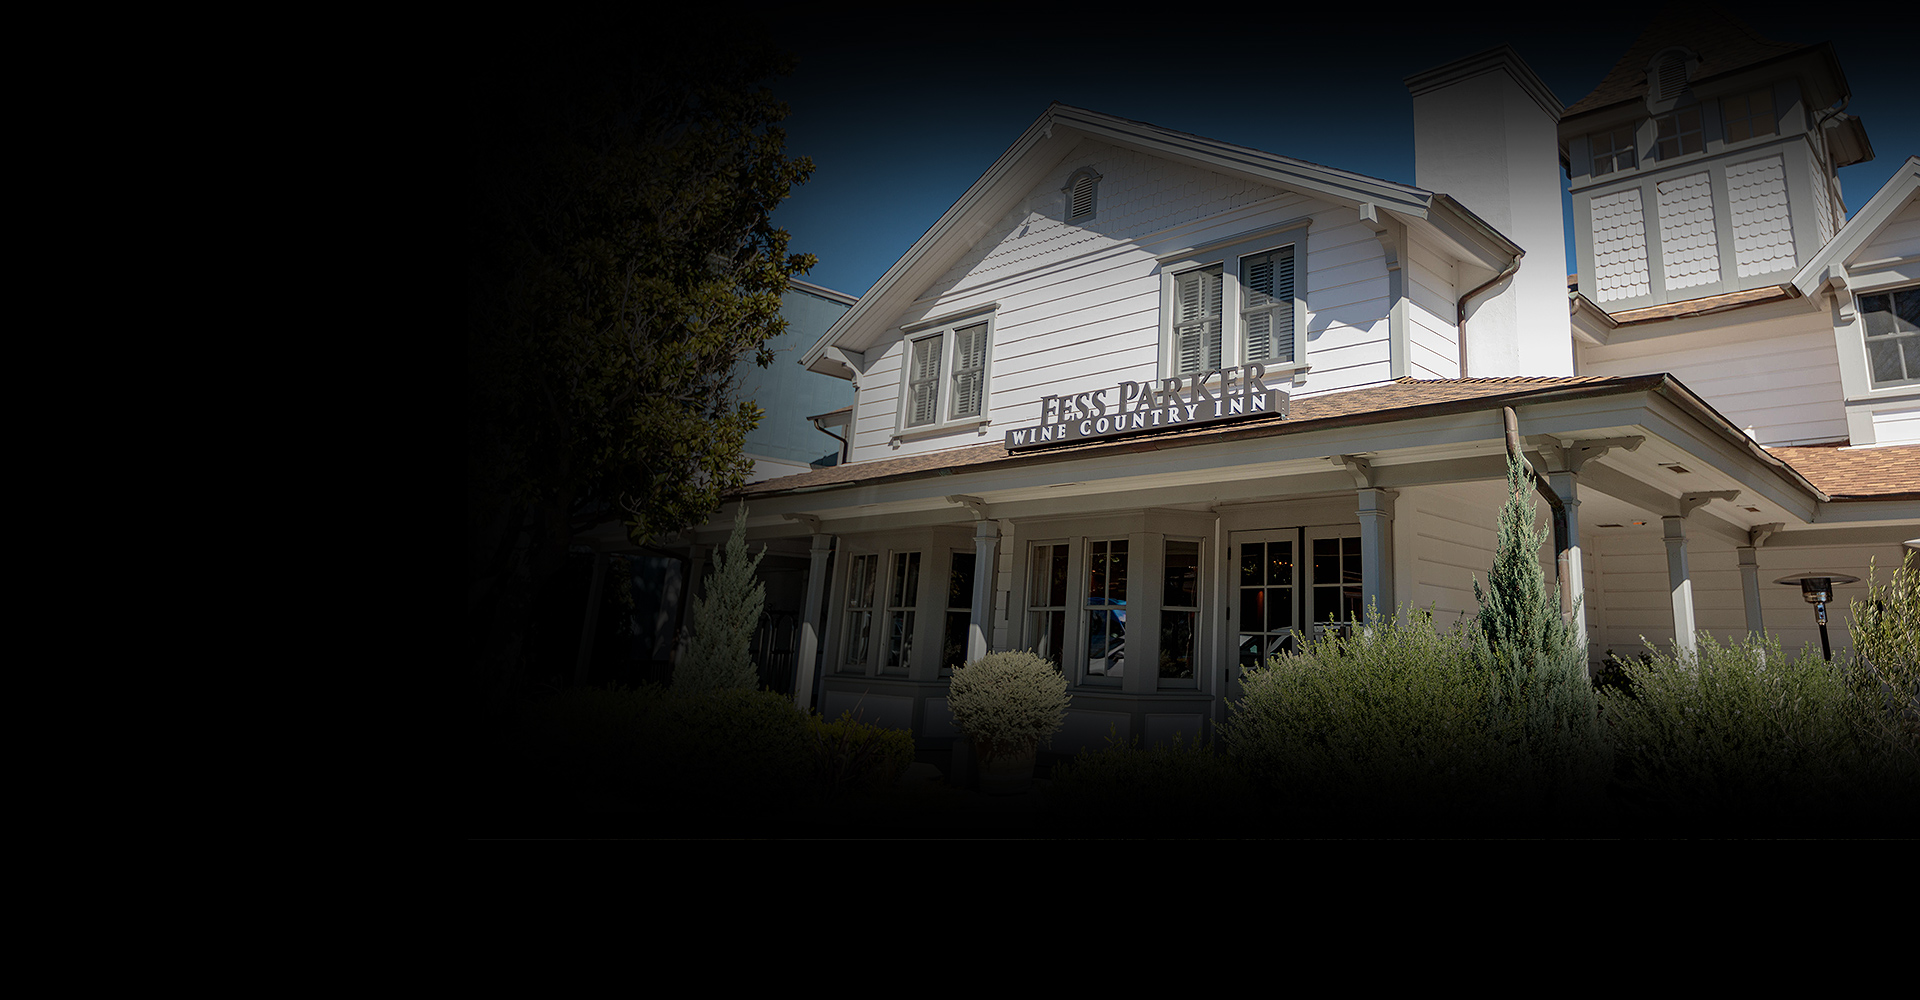 exterior view of fess parker wine country inn